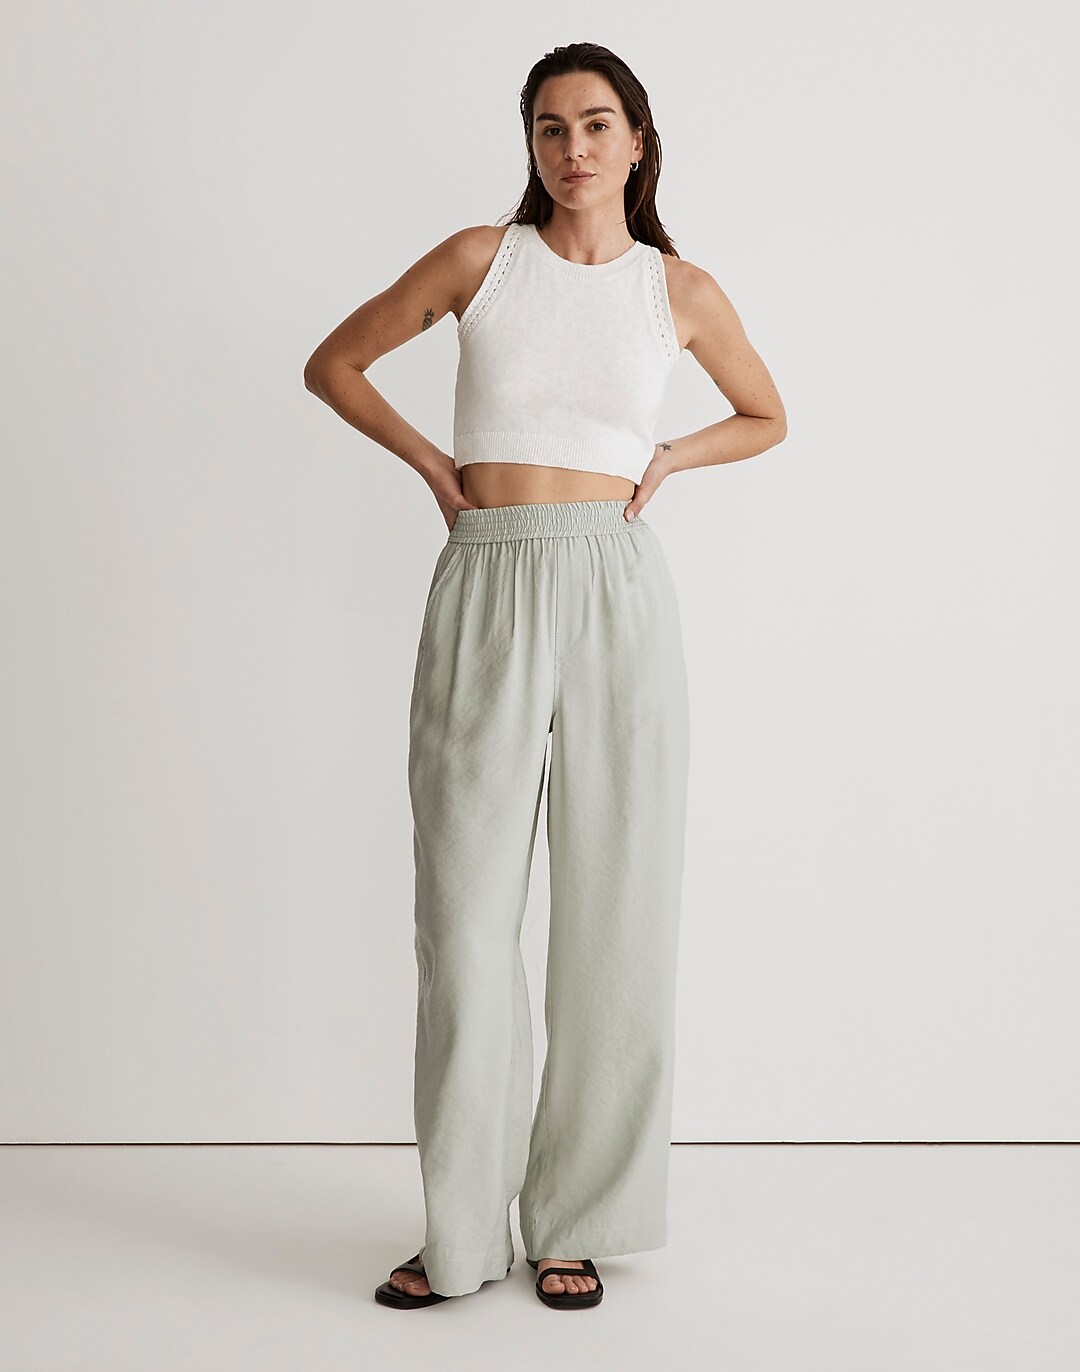 These wide leg pants are a DREAM! So perfect for summer since they